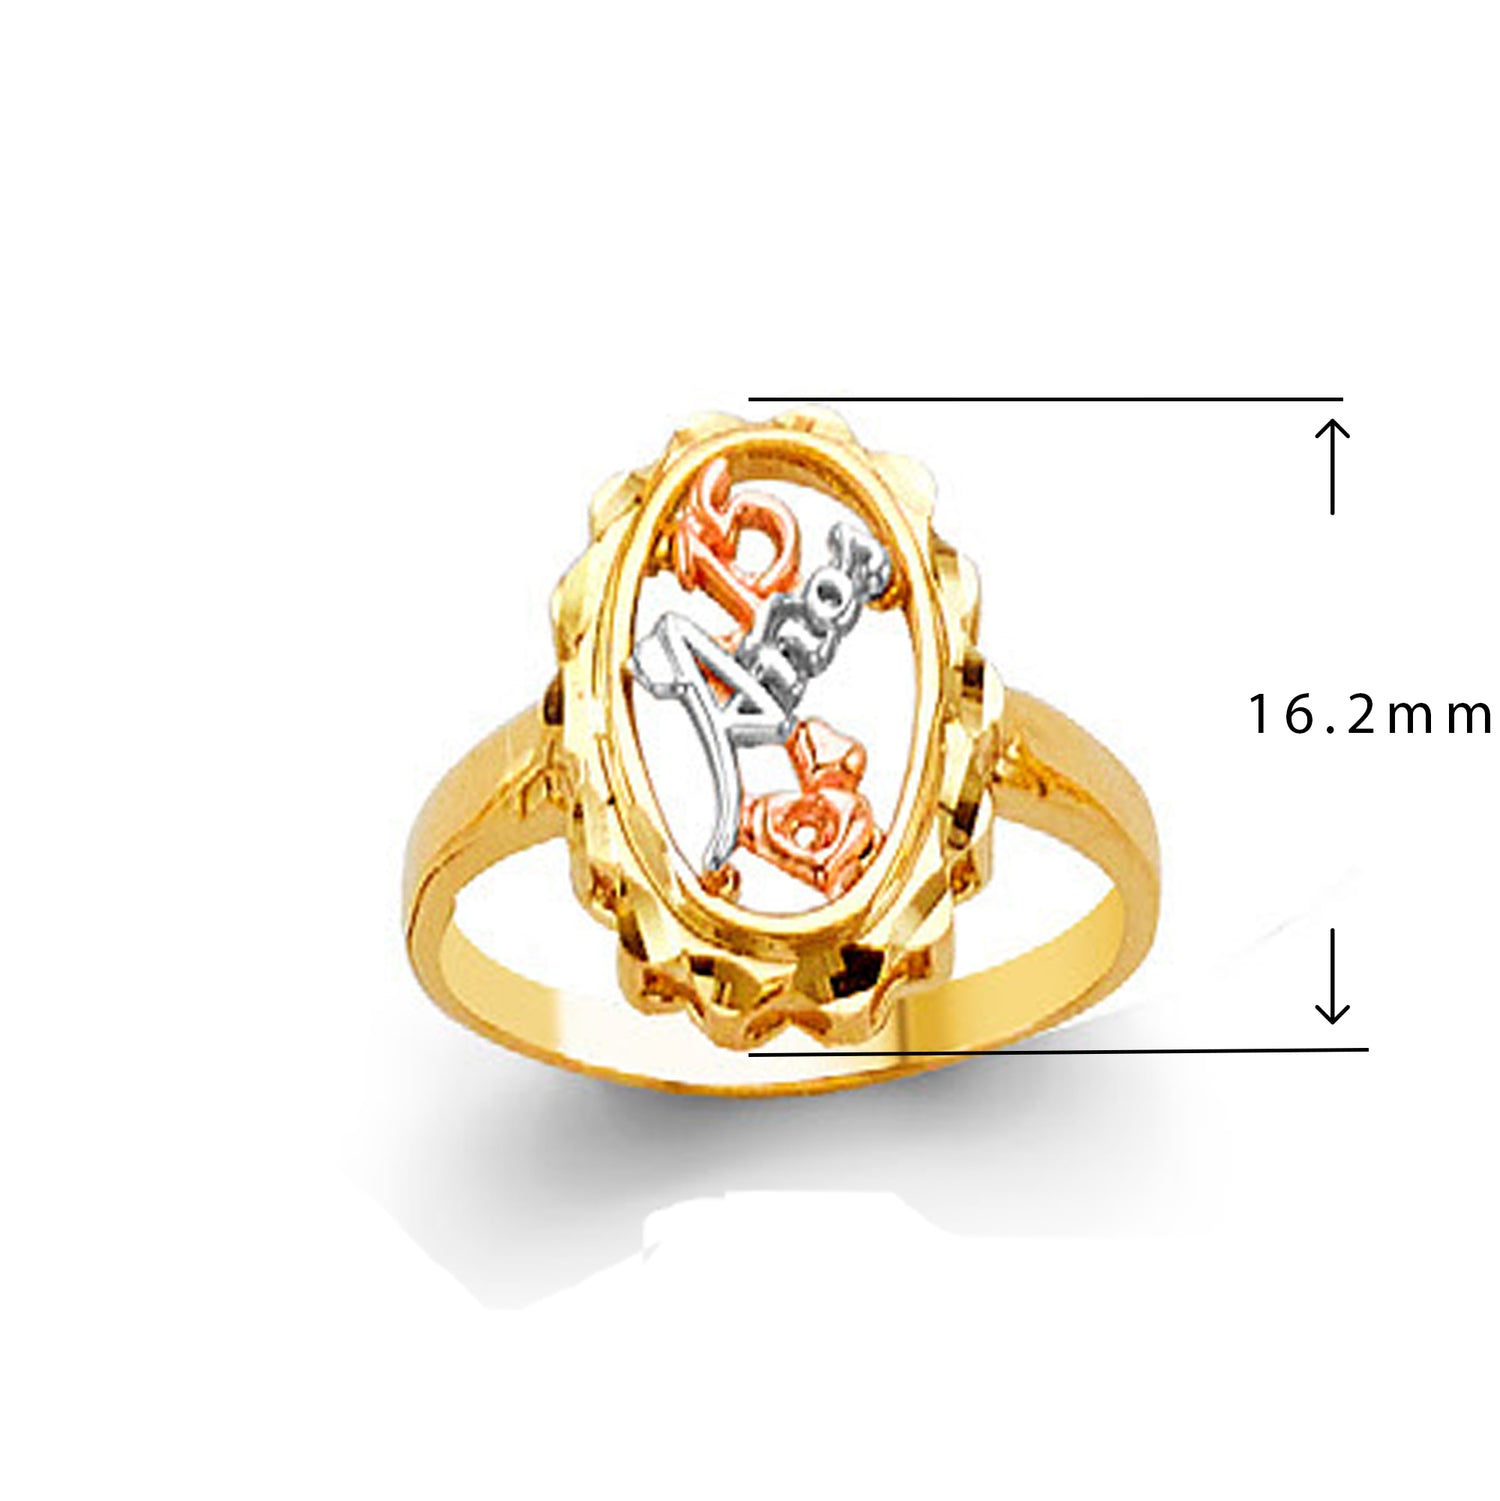 Designer 15 Anos Dual Tone Ring in Solid Gold with Measurement